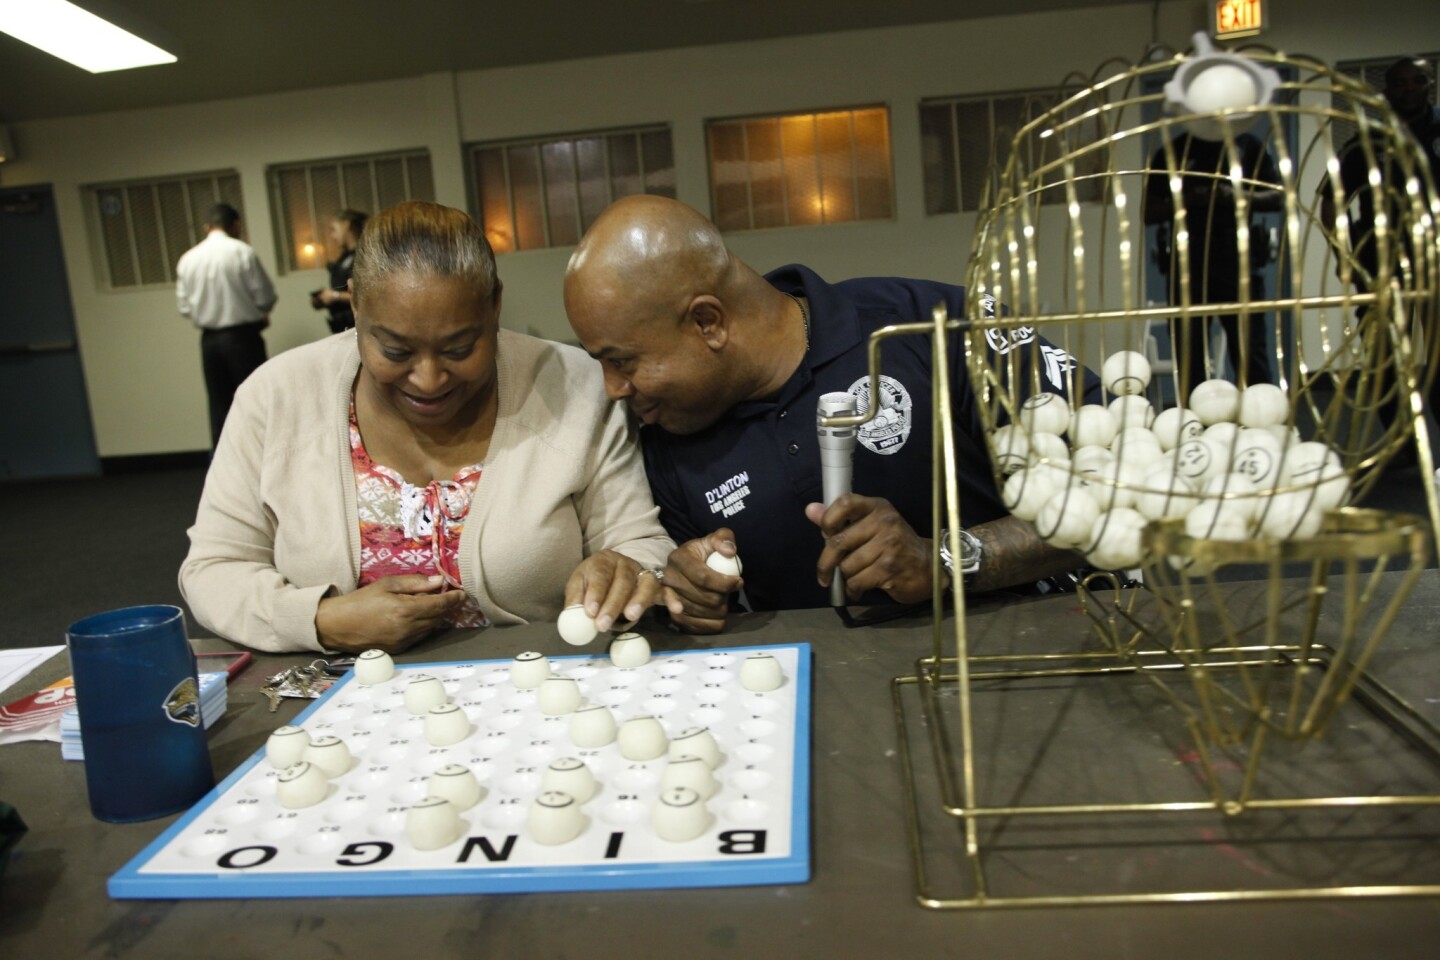 Kathy Wooten helps call bingo numbers with Officer Keith Linton at a bingo night in the Jordan Downs gym hosted by LAPD officers.